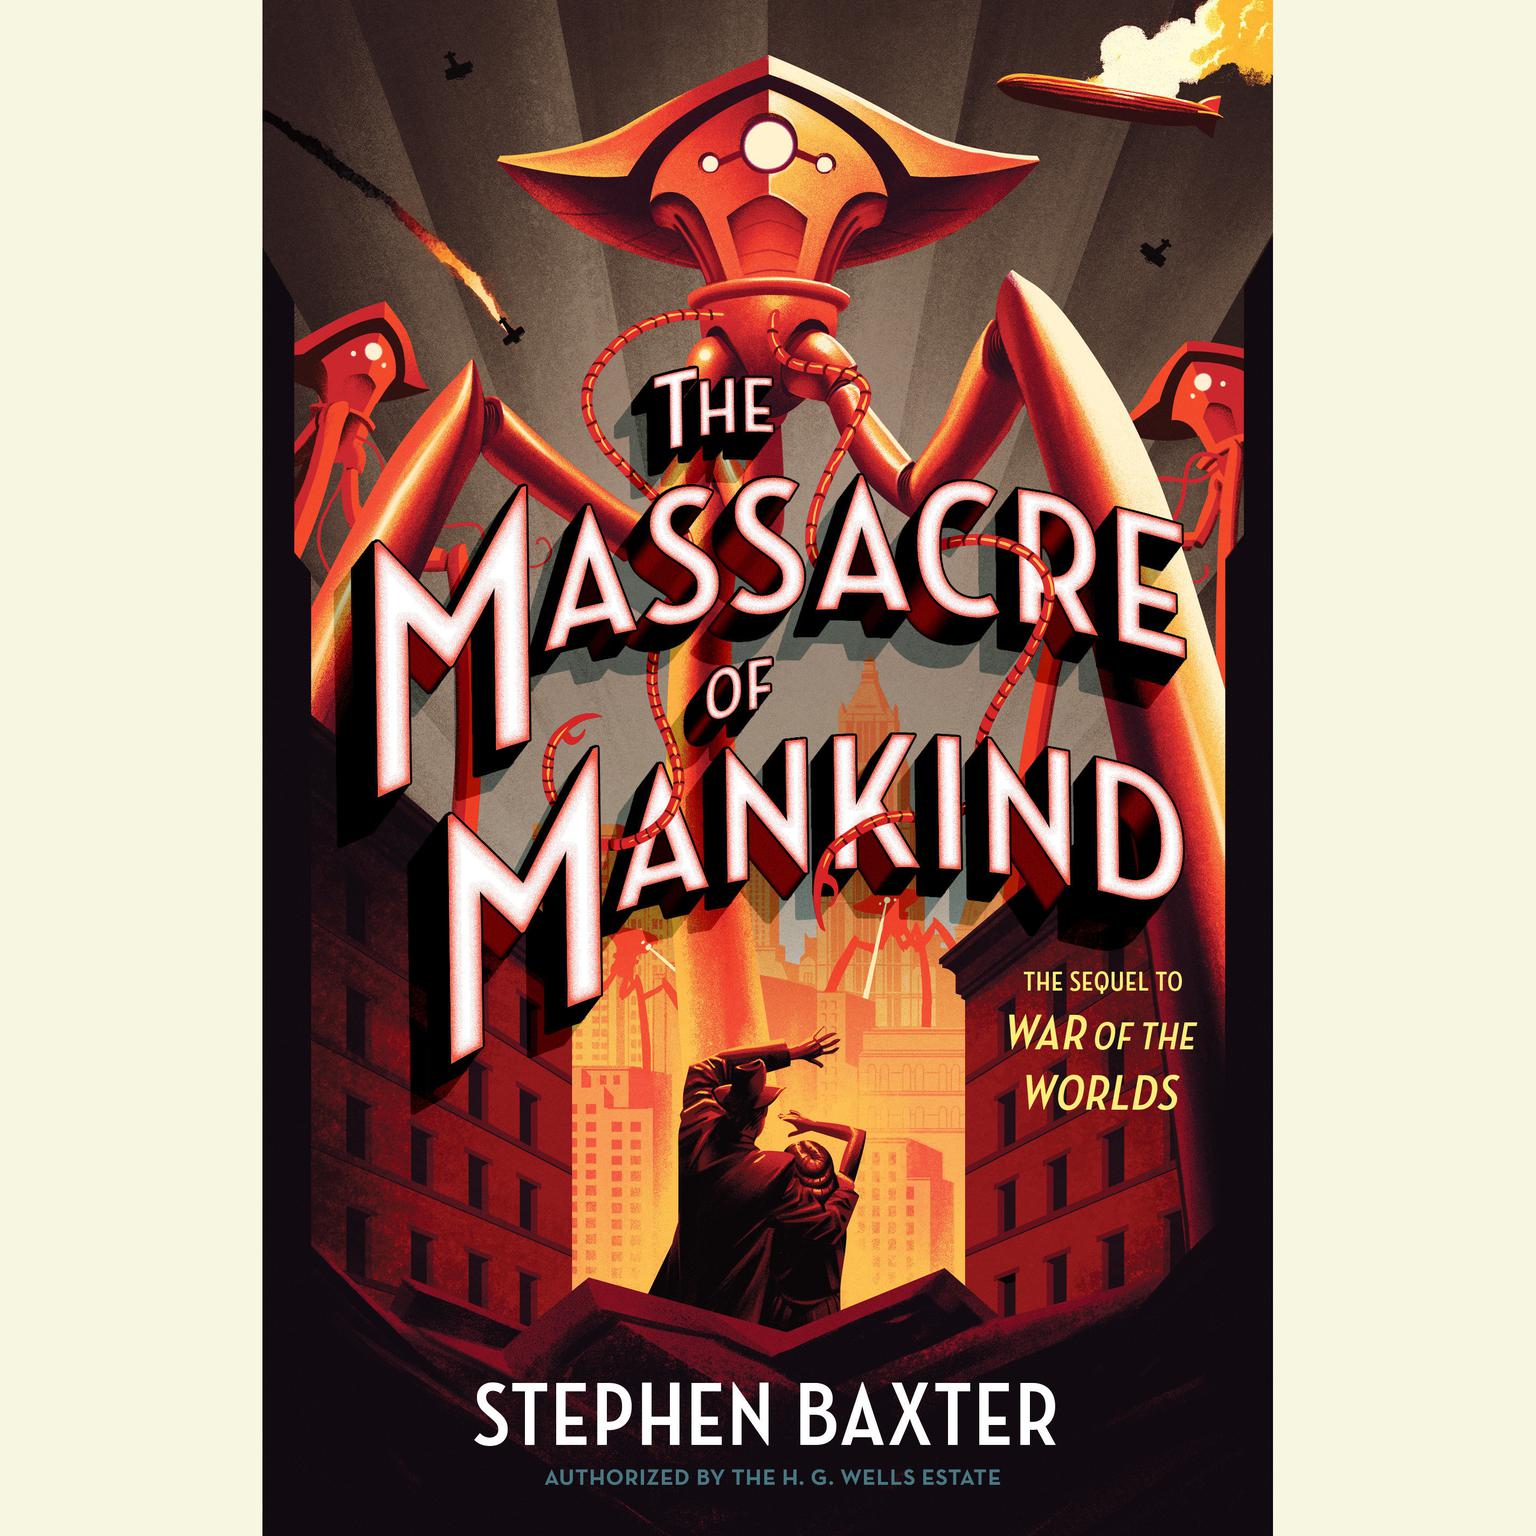 The Massacre of Mankind: Sequel to The War of the Worlds Audiobook, by Stephen Baxter